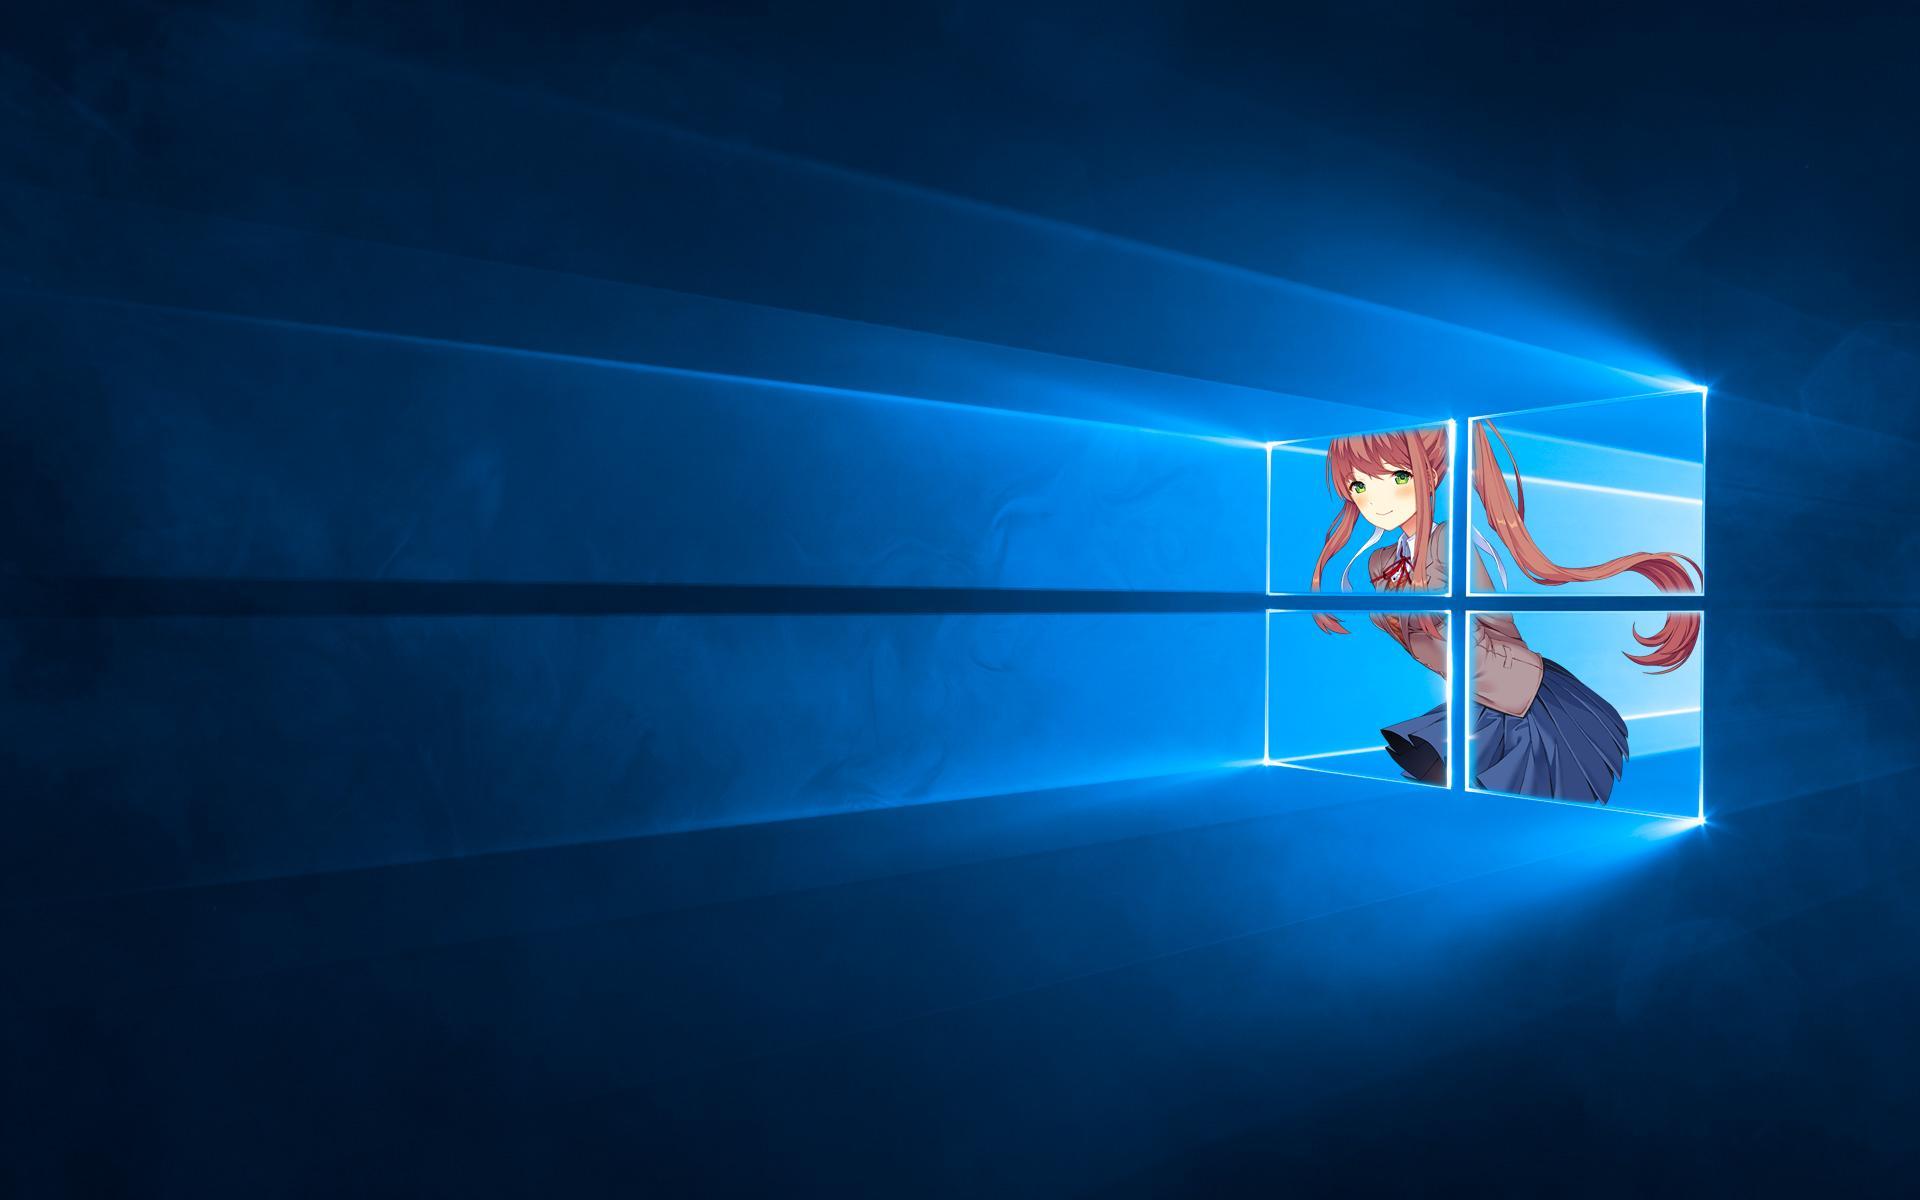 Have a piece of Monika on your PC with these wallpaper! Please